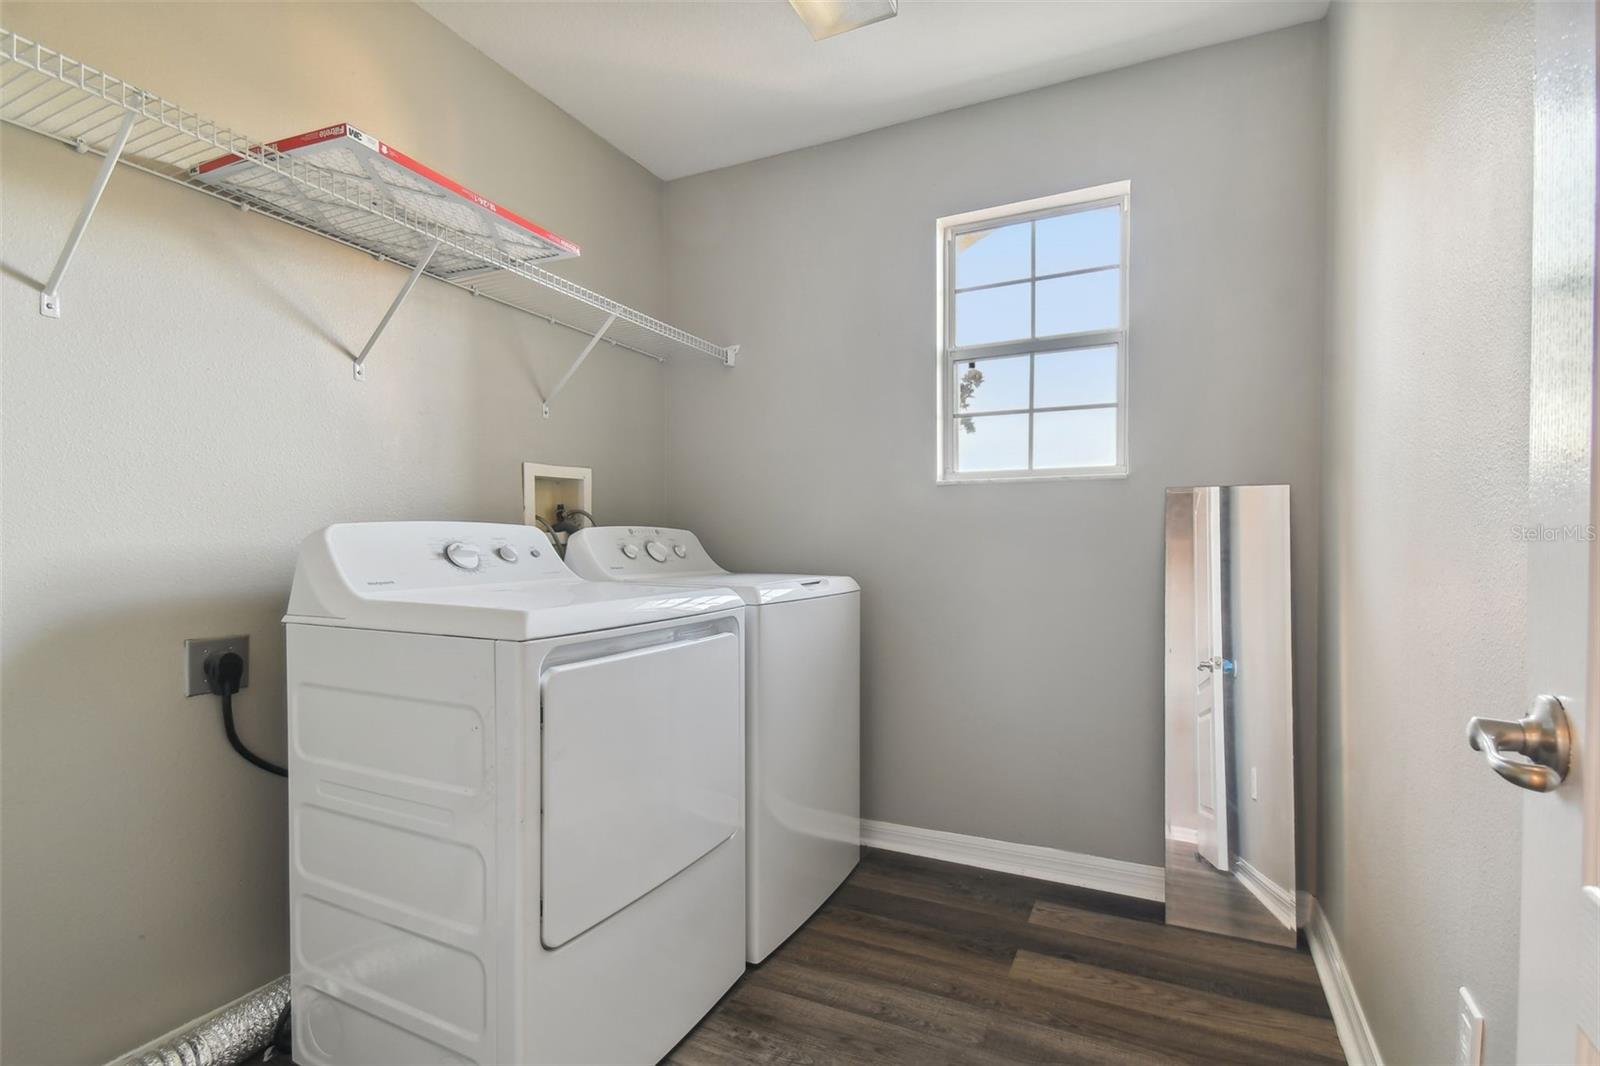 Large laundry closet with space for a potential sink area.